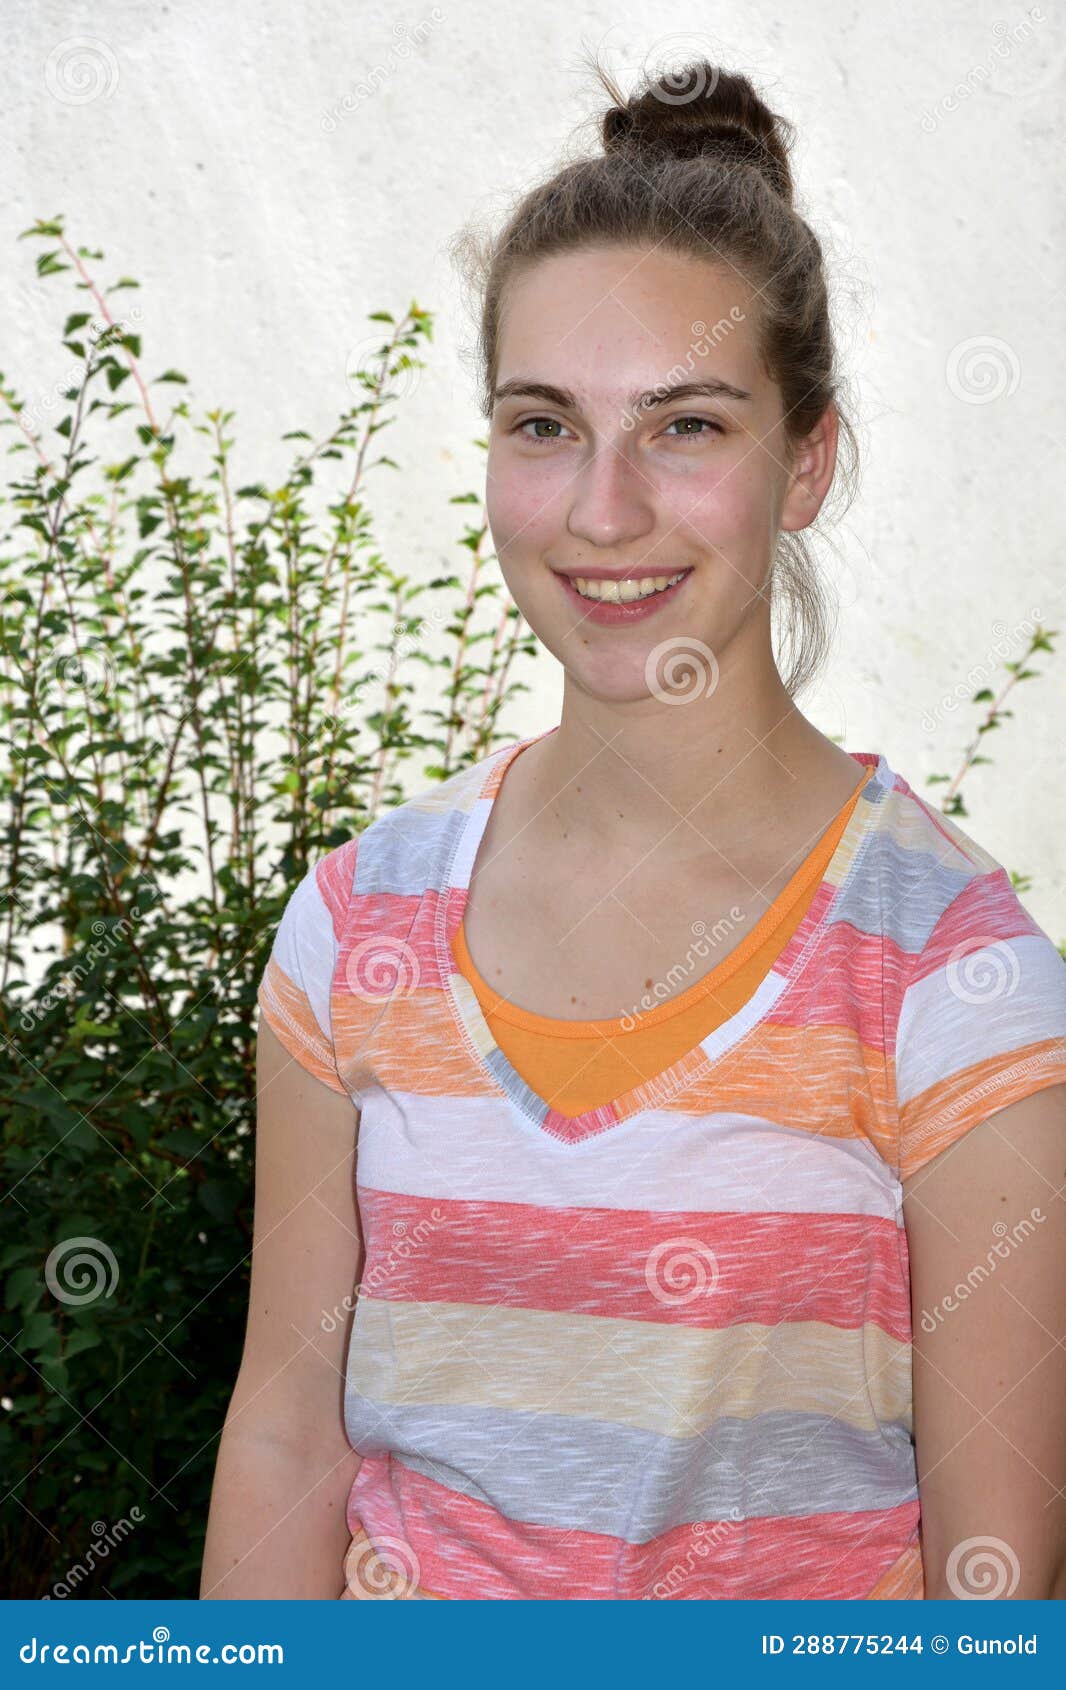 portrait of a cute young girl with chignon